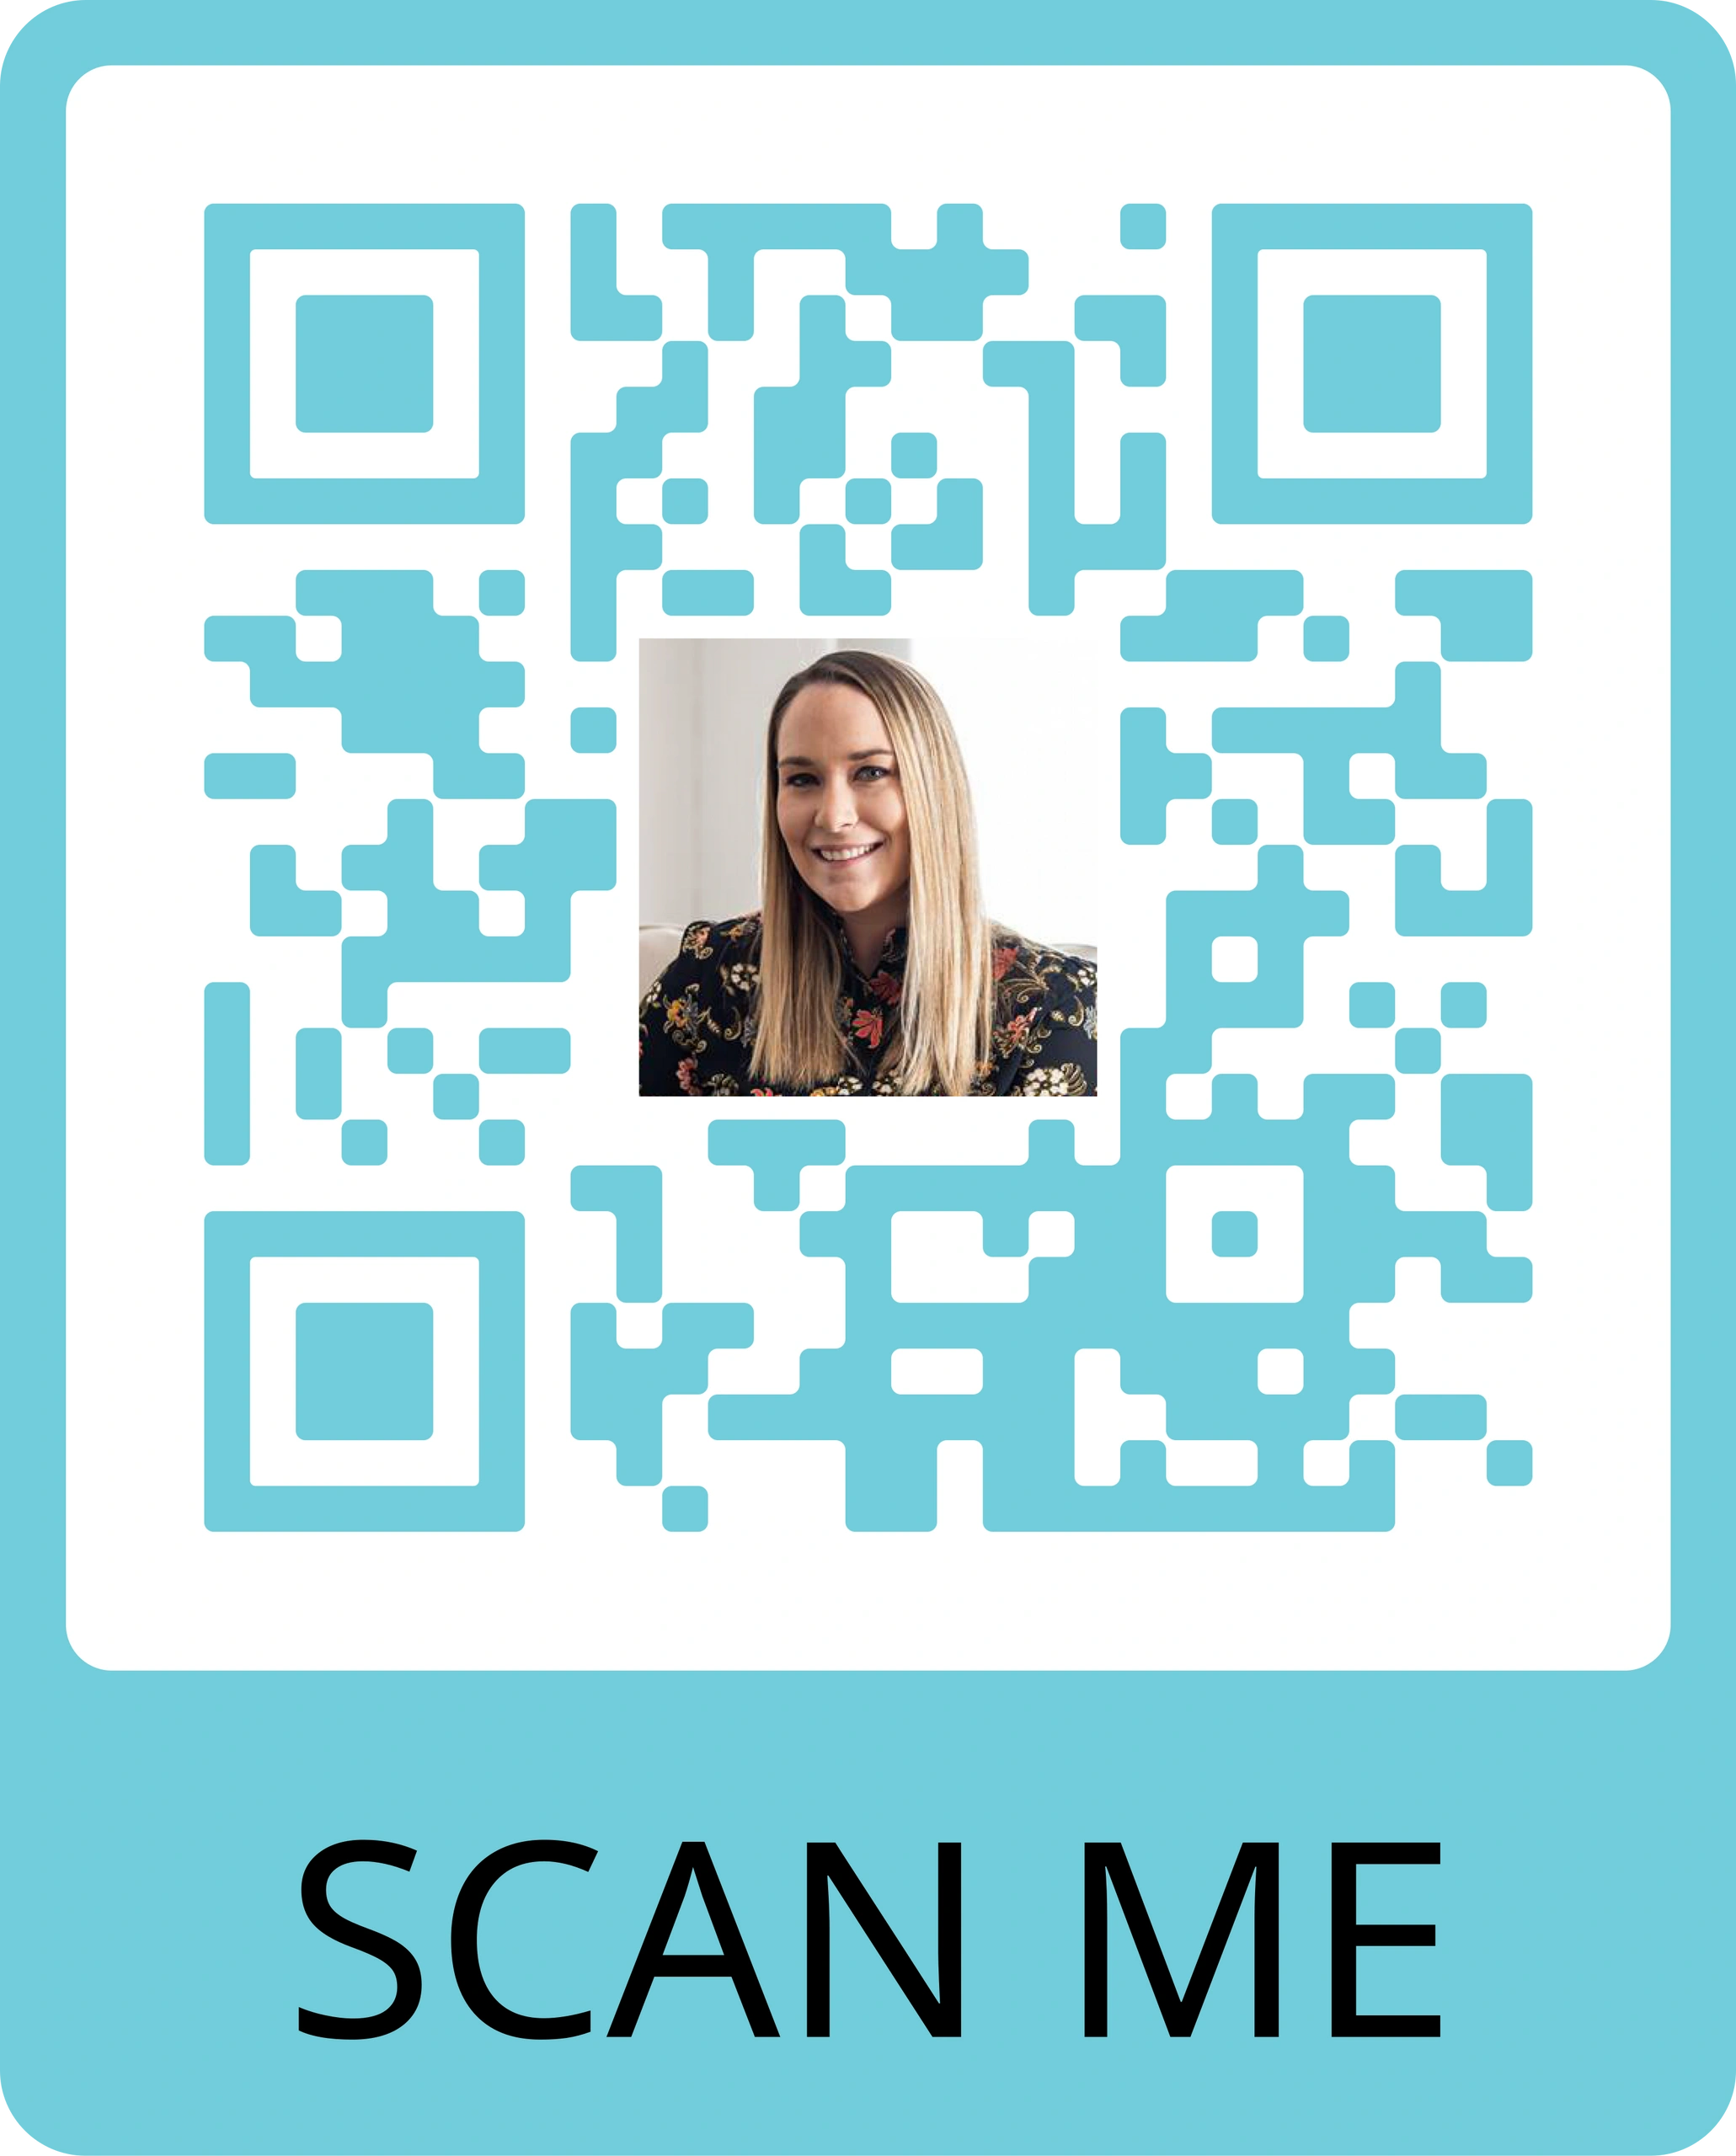 qr code for contact info of professional couples counseling of Sarah DiLeonardo, L.P.C. in NJ and PA